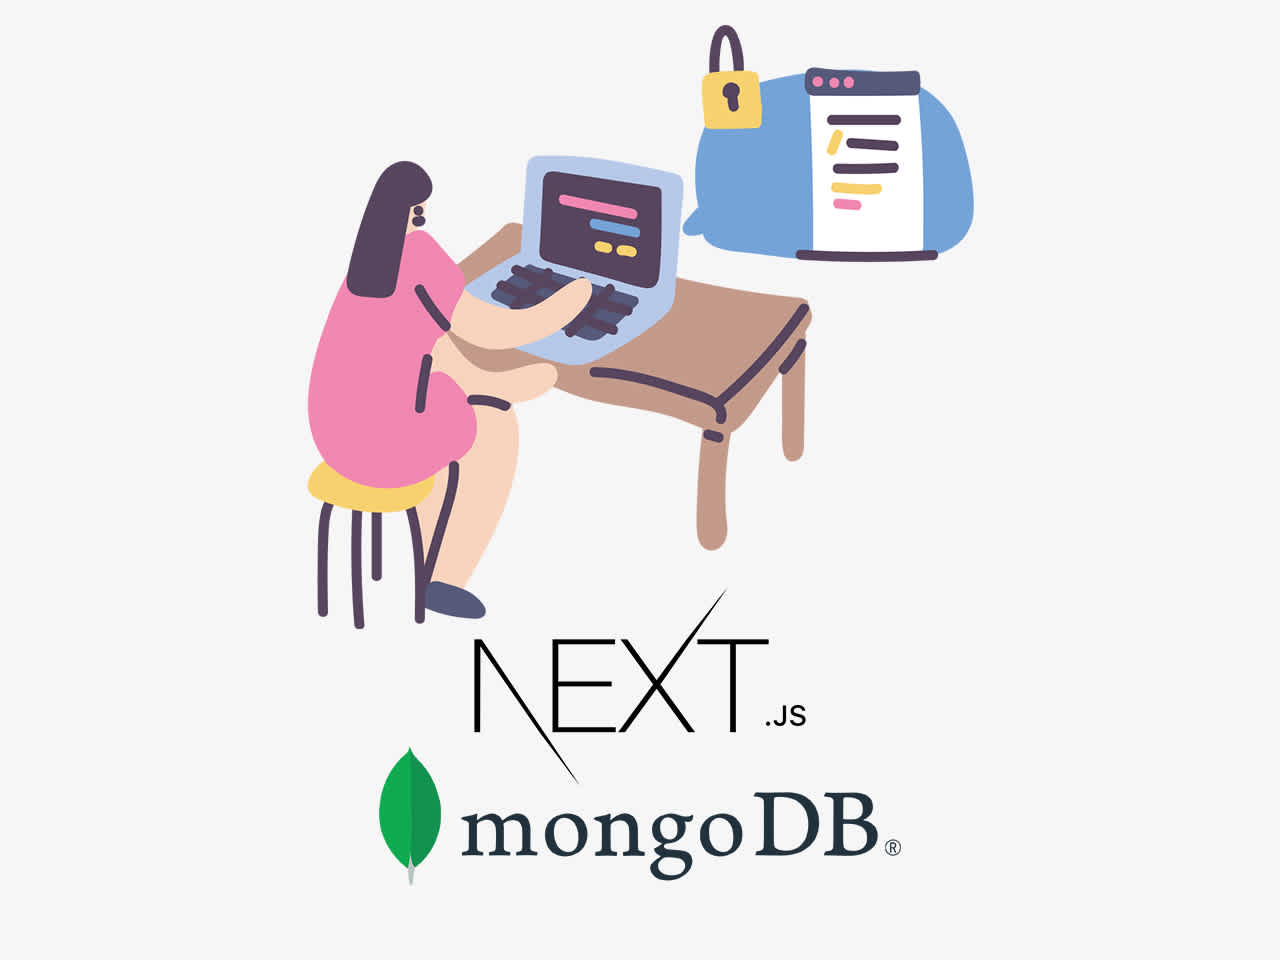 How I build a full-fledged app with Next.js and MongoDB Part 3: Email Verification, Password Reset/Change